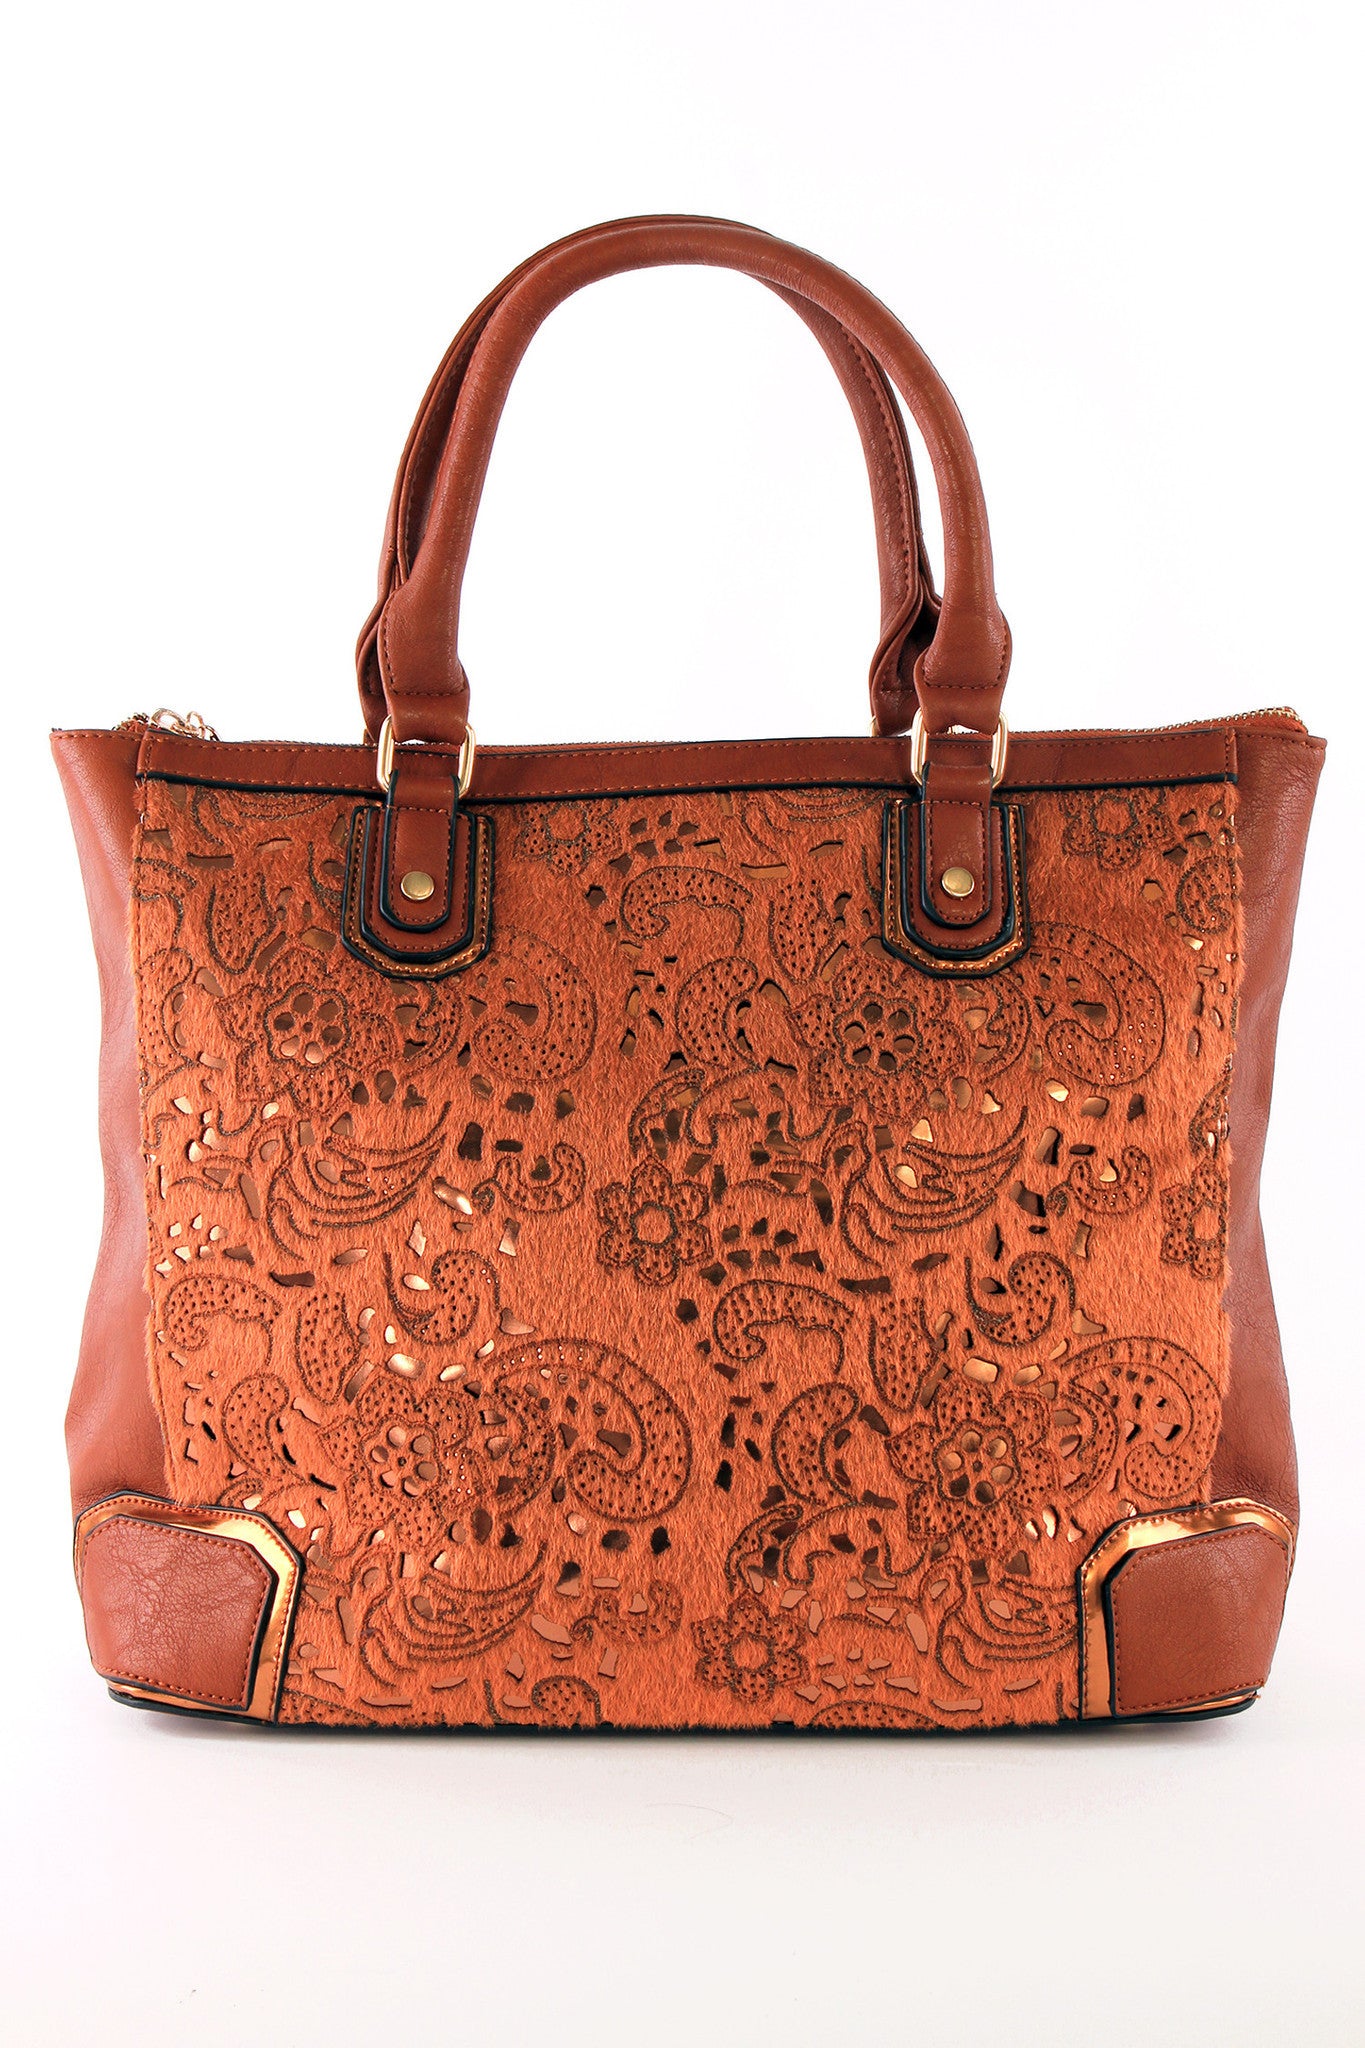 Panelled, Lace Insert Tote Bag